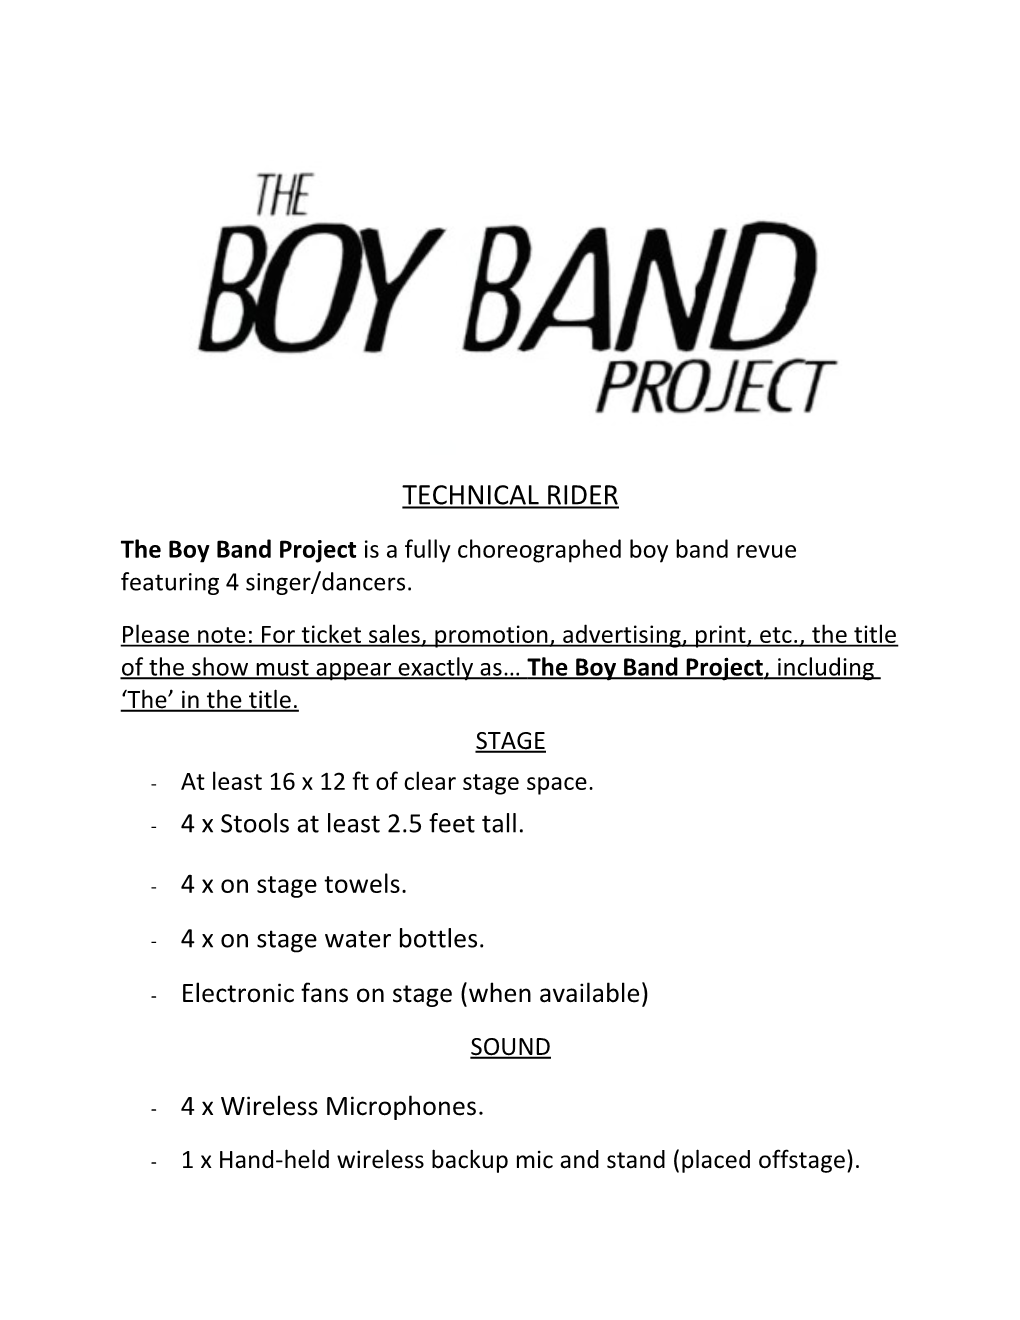 The Boy Band Project Is a Fully Choreographed Boy Band Revue Featuring 4 Singer/Dancers